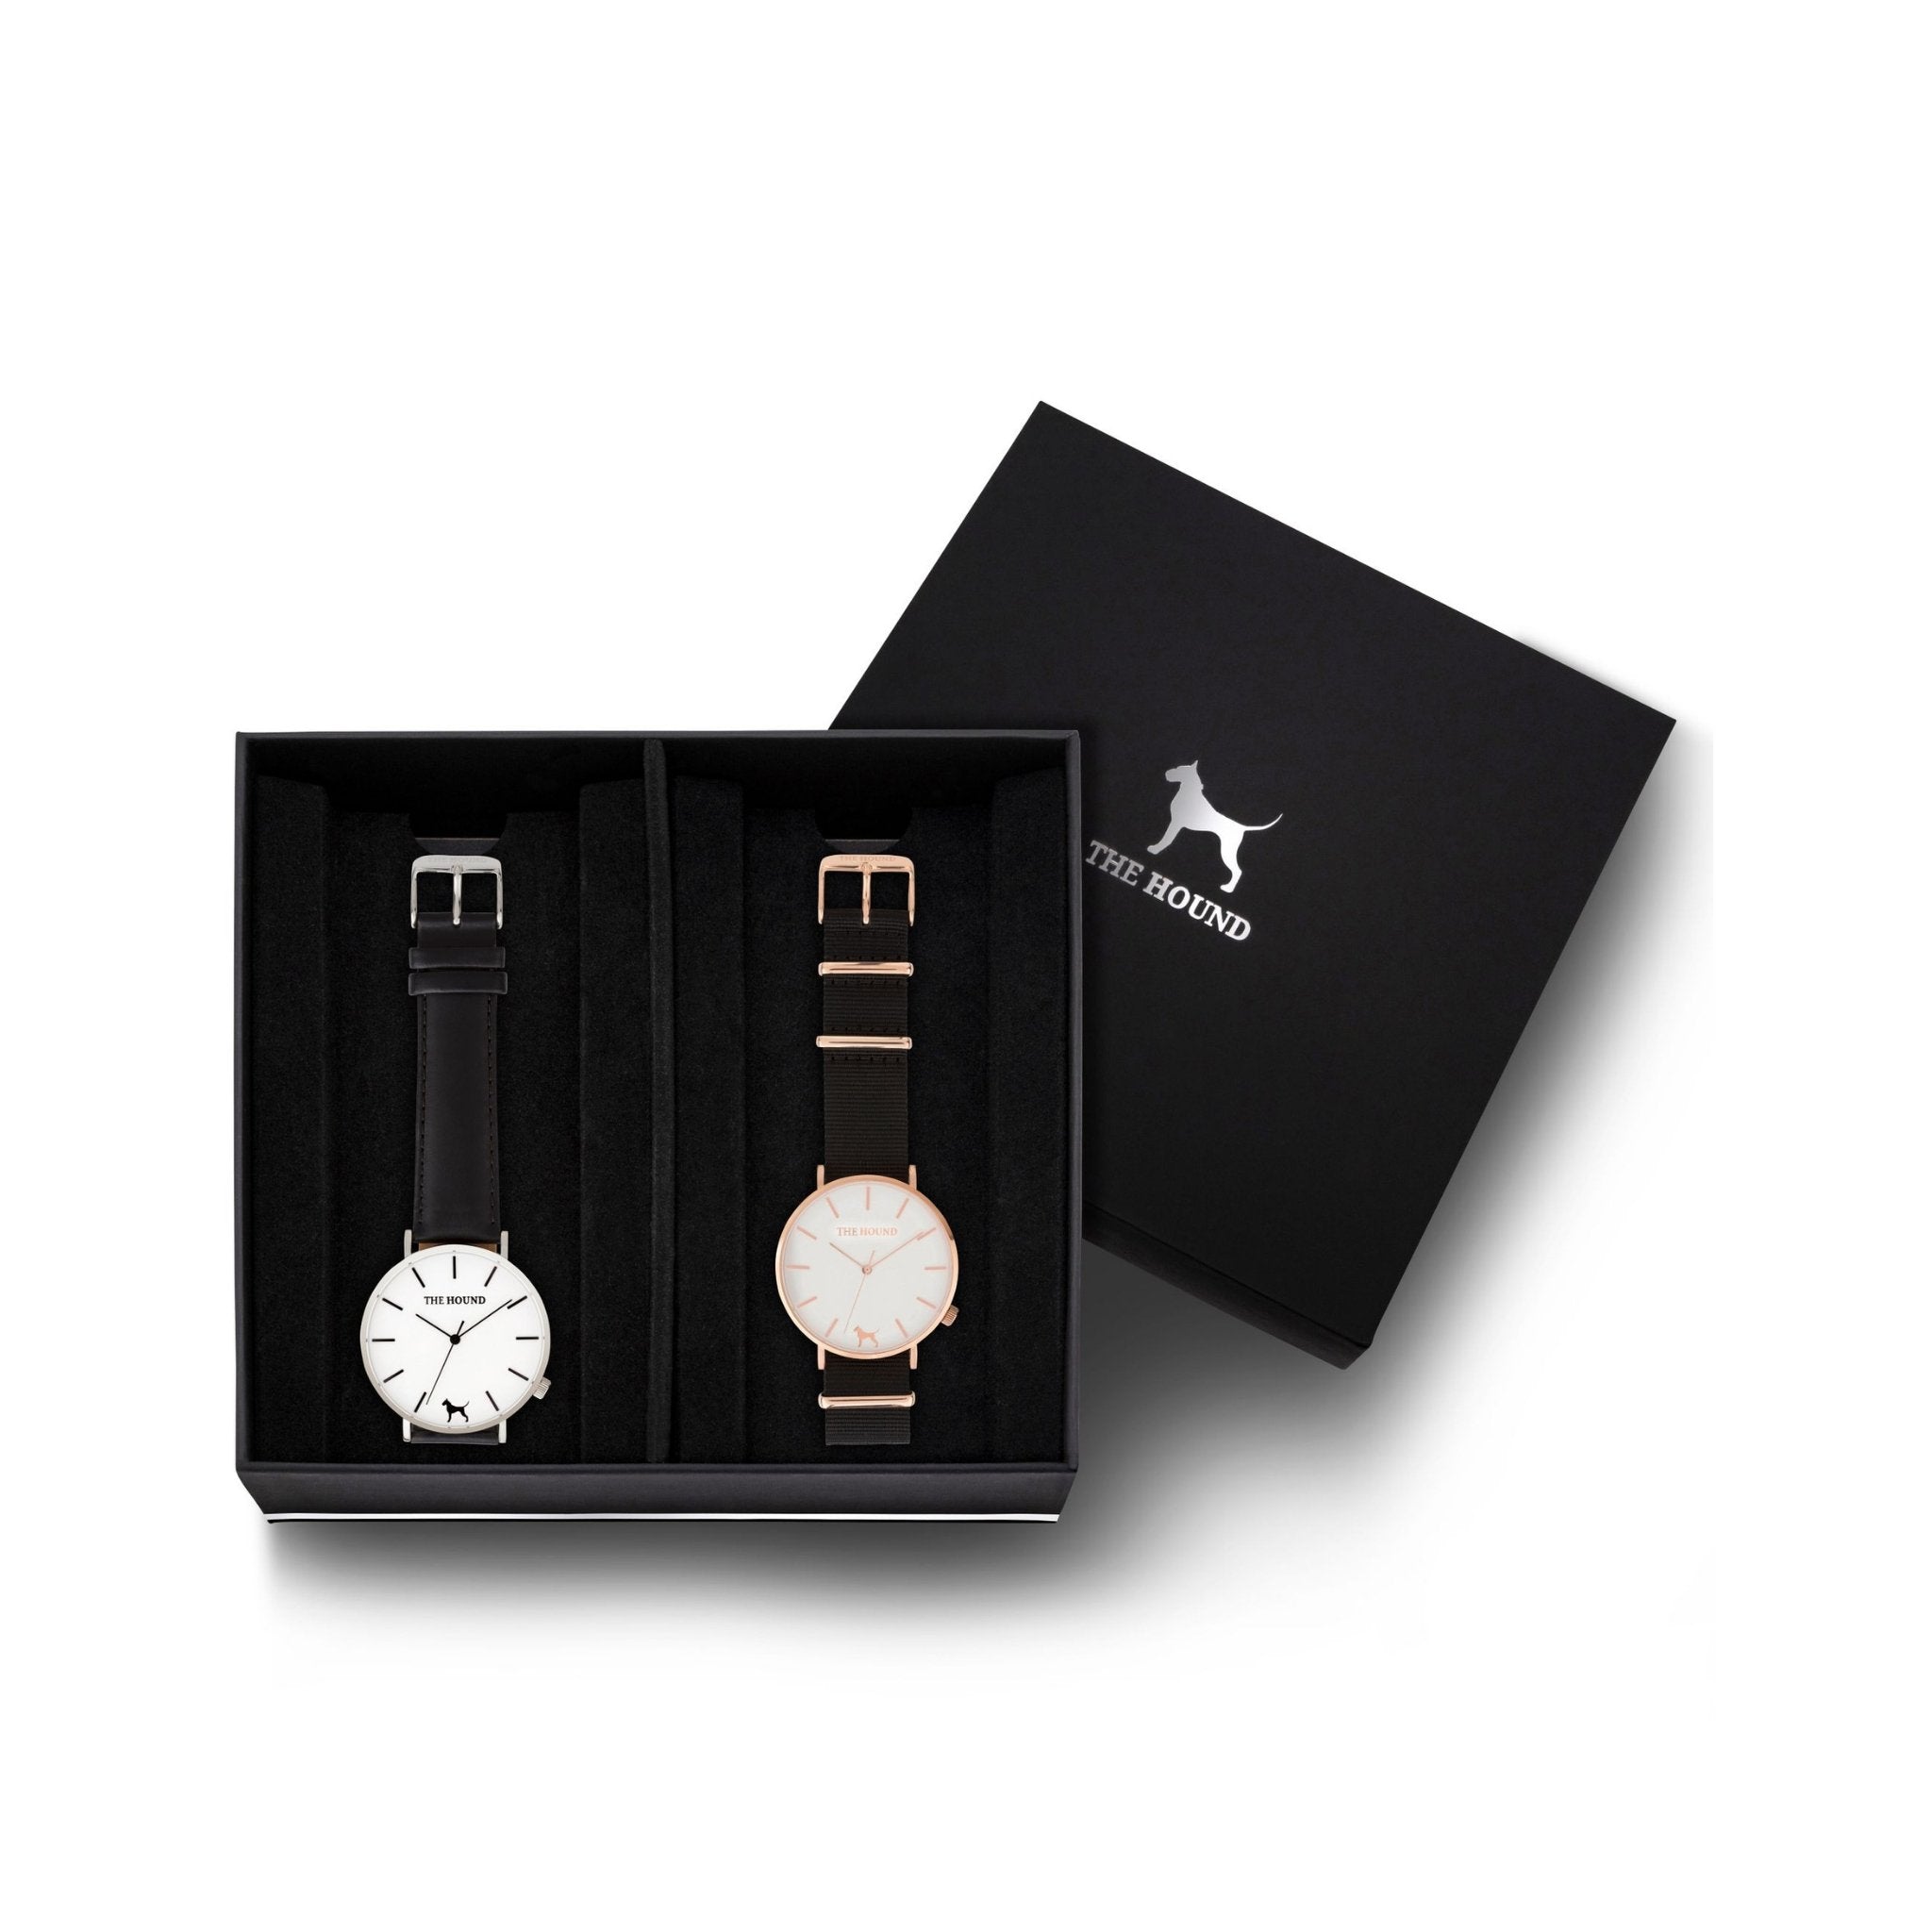 Custom gift set - Silver and white watch with stitched black genuine leather band and a rose gold and white watch with black nato leather band